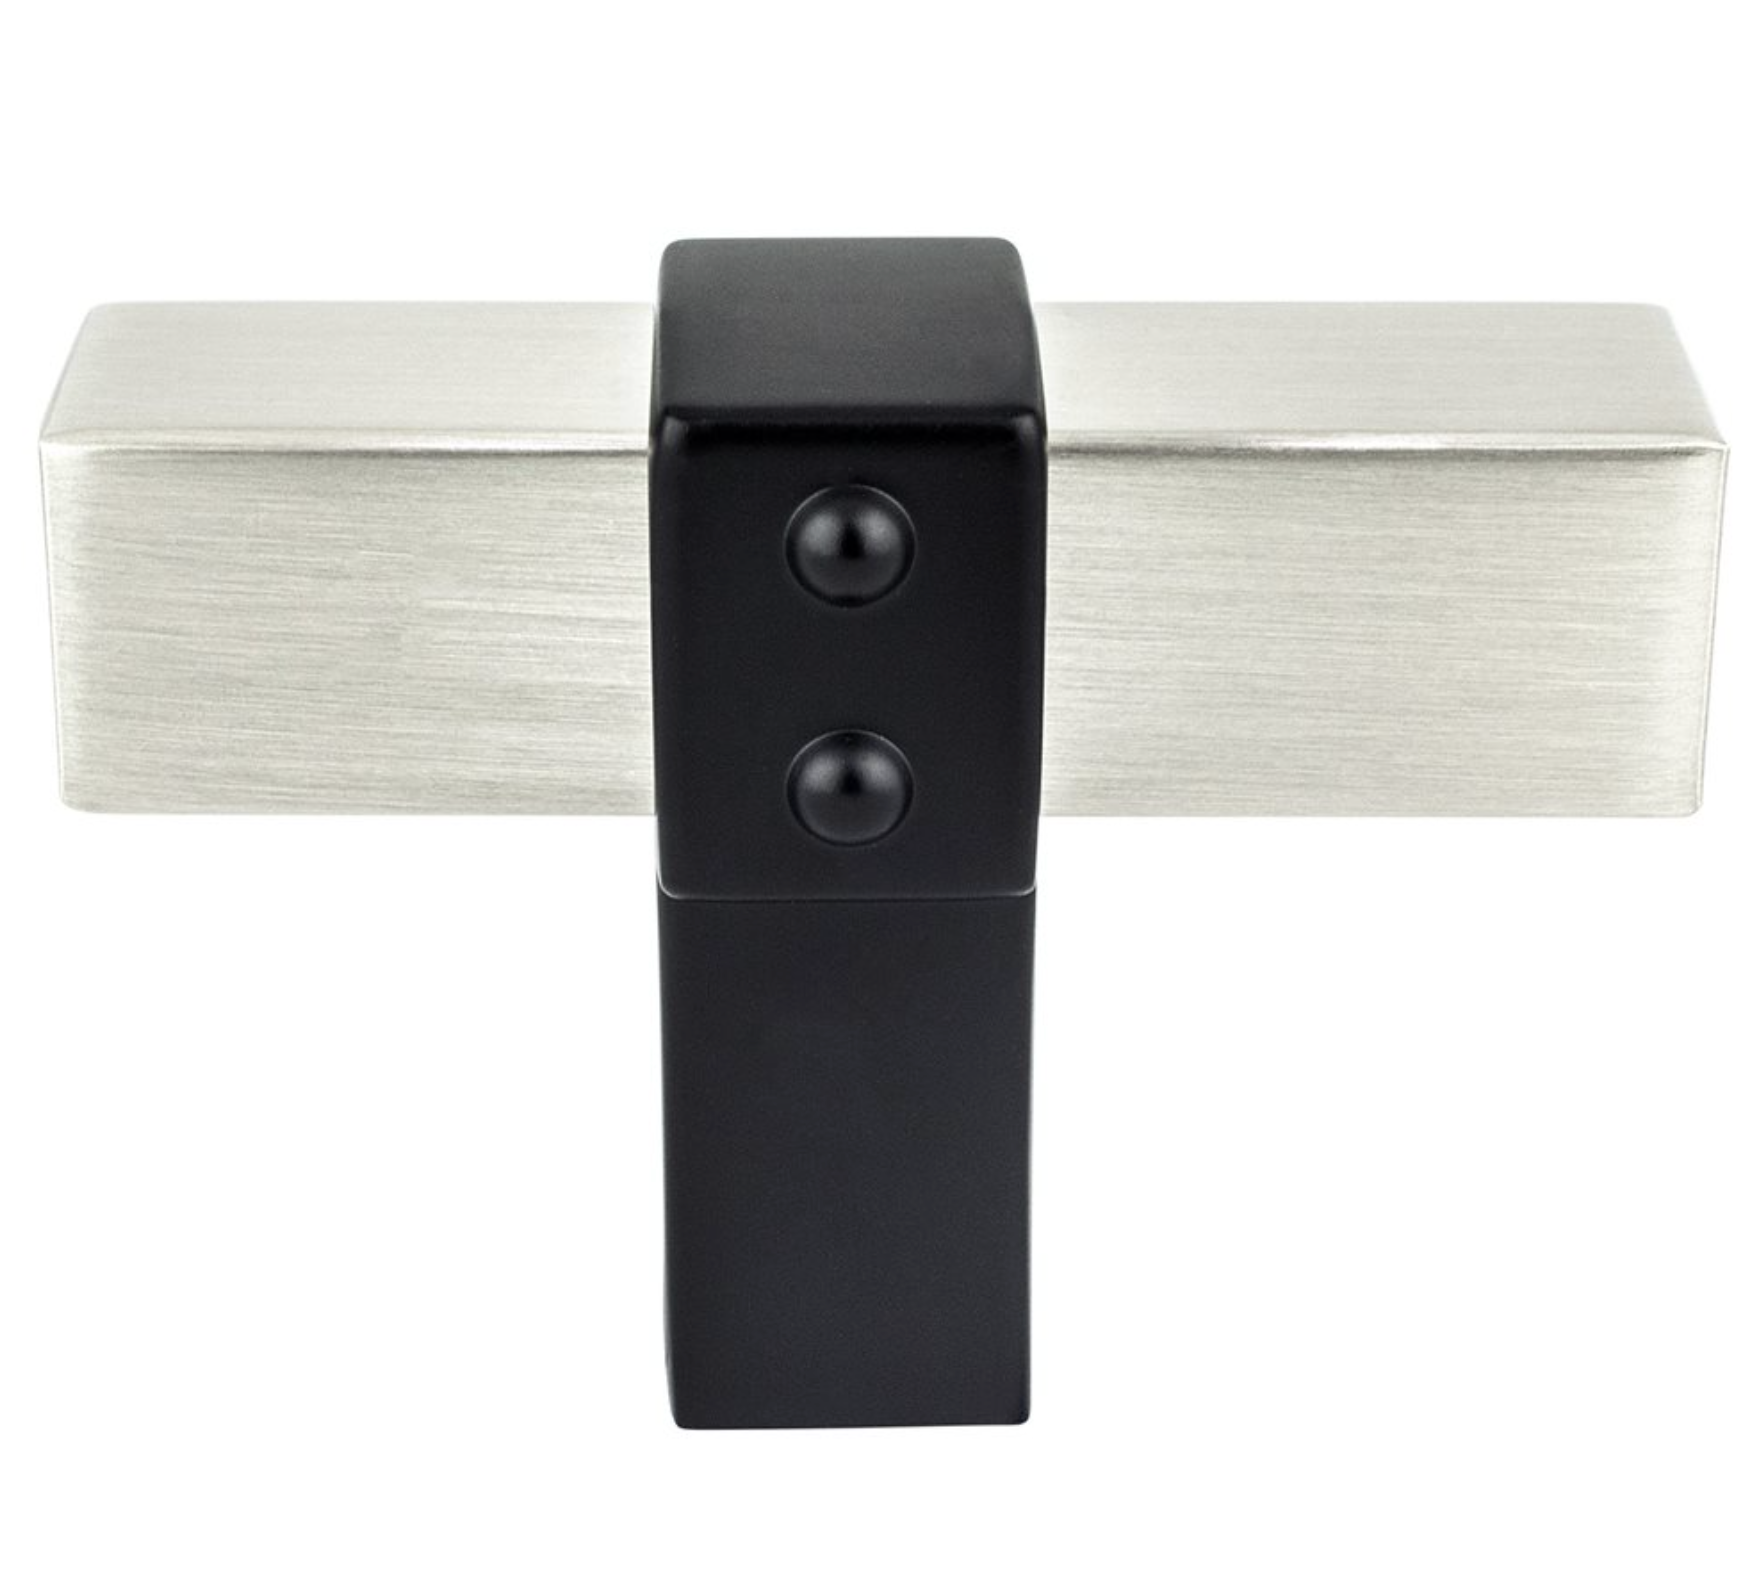 Matte Black and Brushed Nickel "Rio" Dual-Finish Cabinet Knob and Drawer Pulls - Industry Hardware